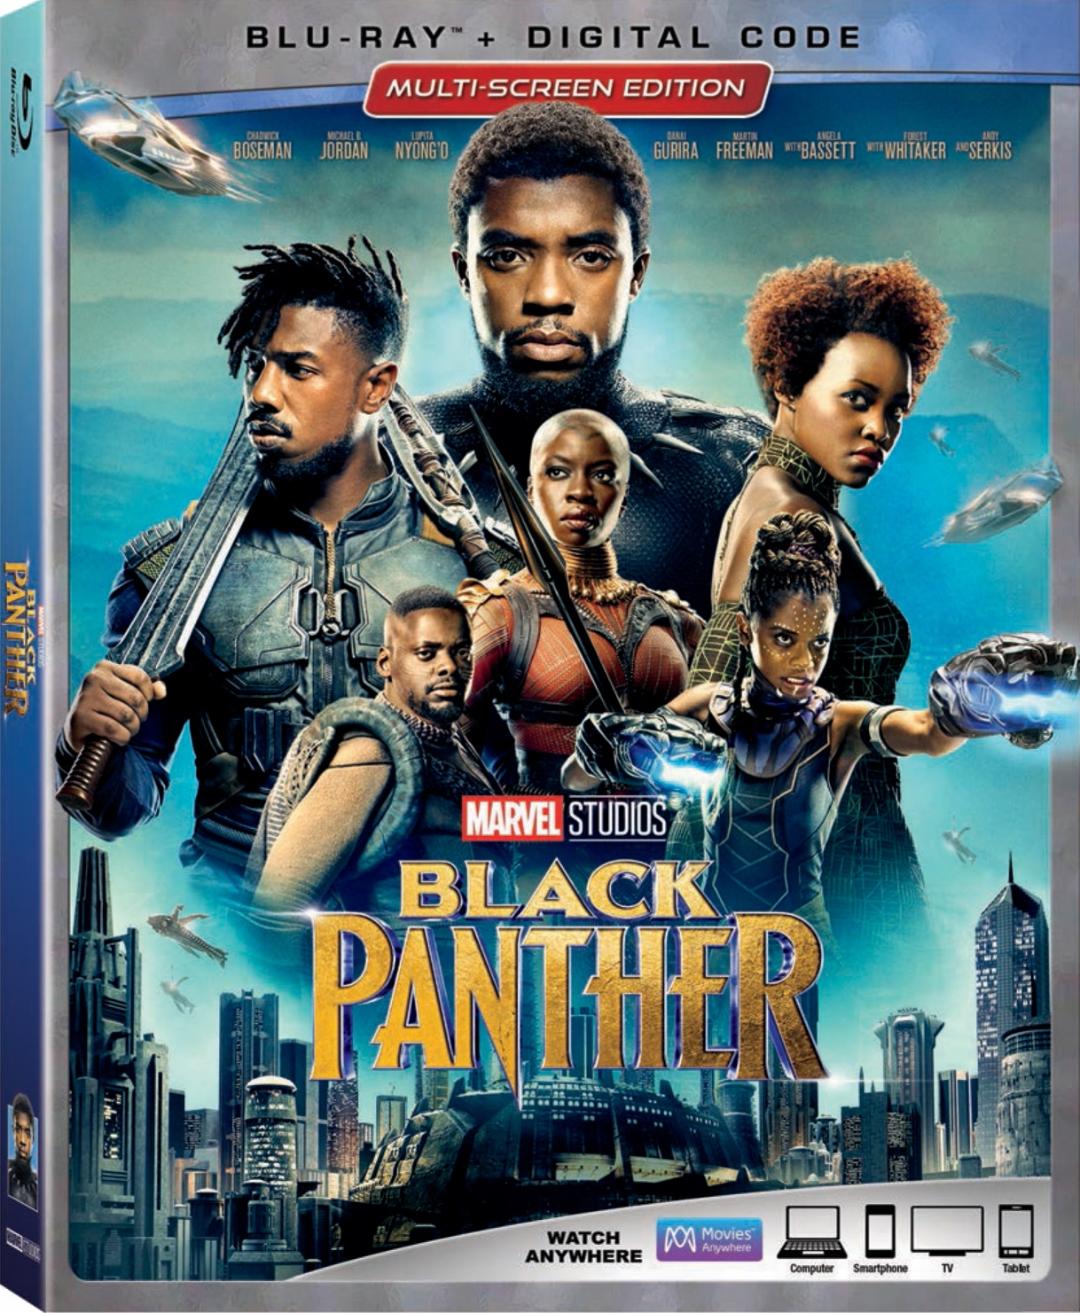 10 Things You Don't Know About Marvel Studios' Black Panther